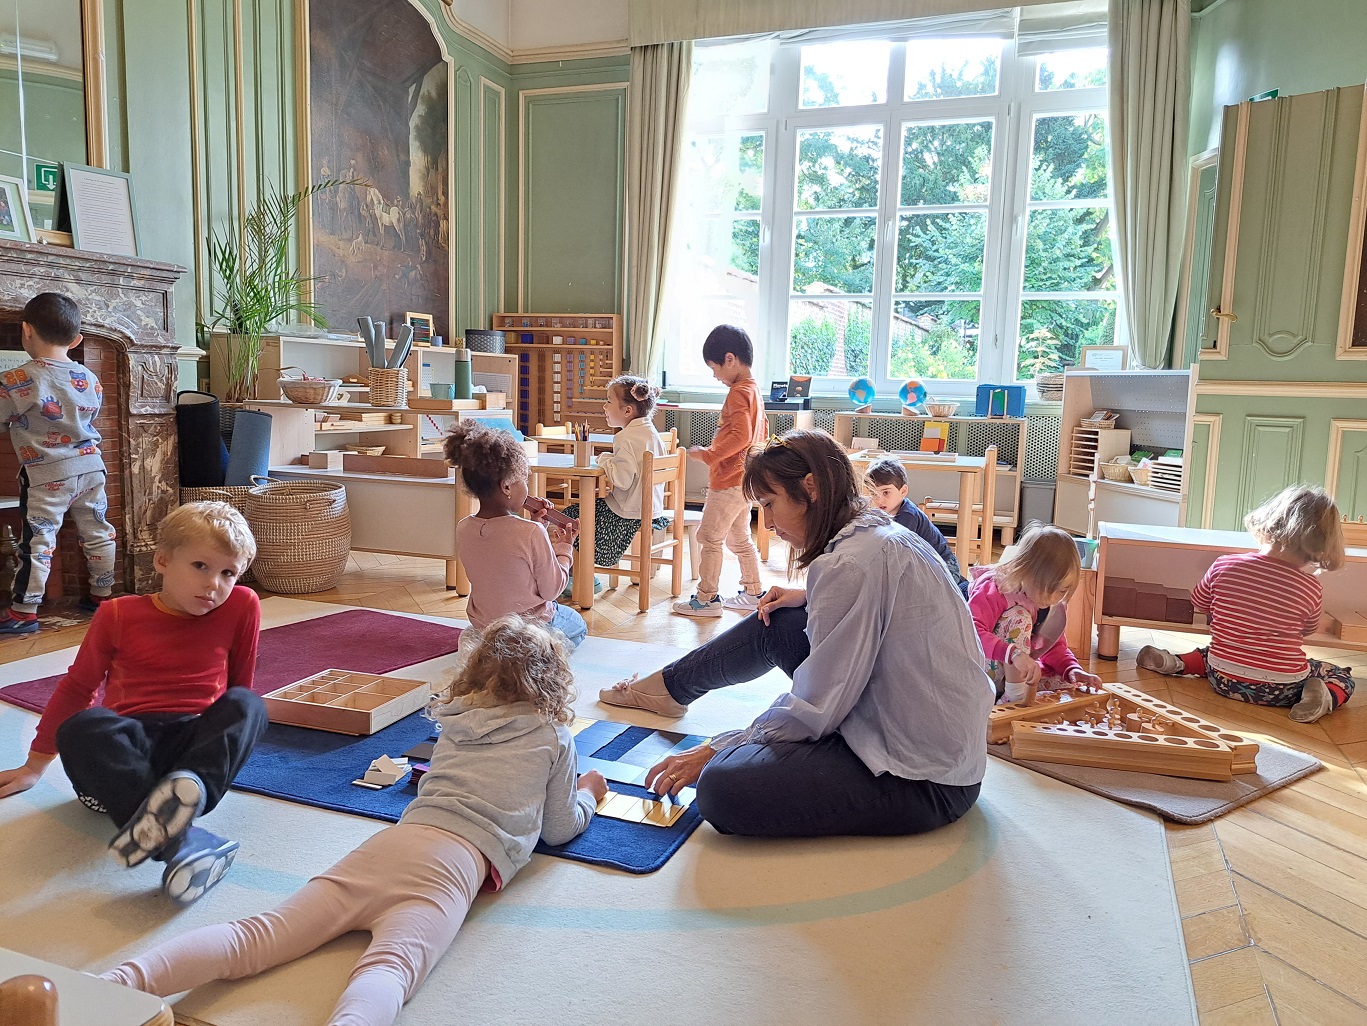 A Montessori guide is observing children carrying out their various activities in the classroom.